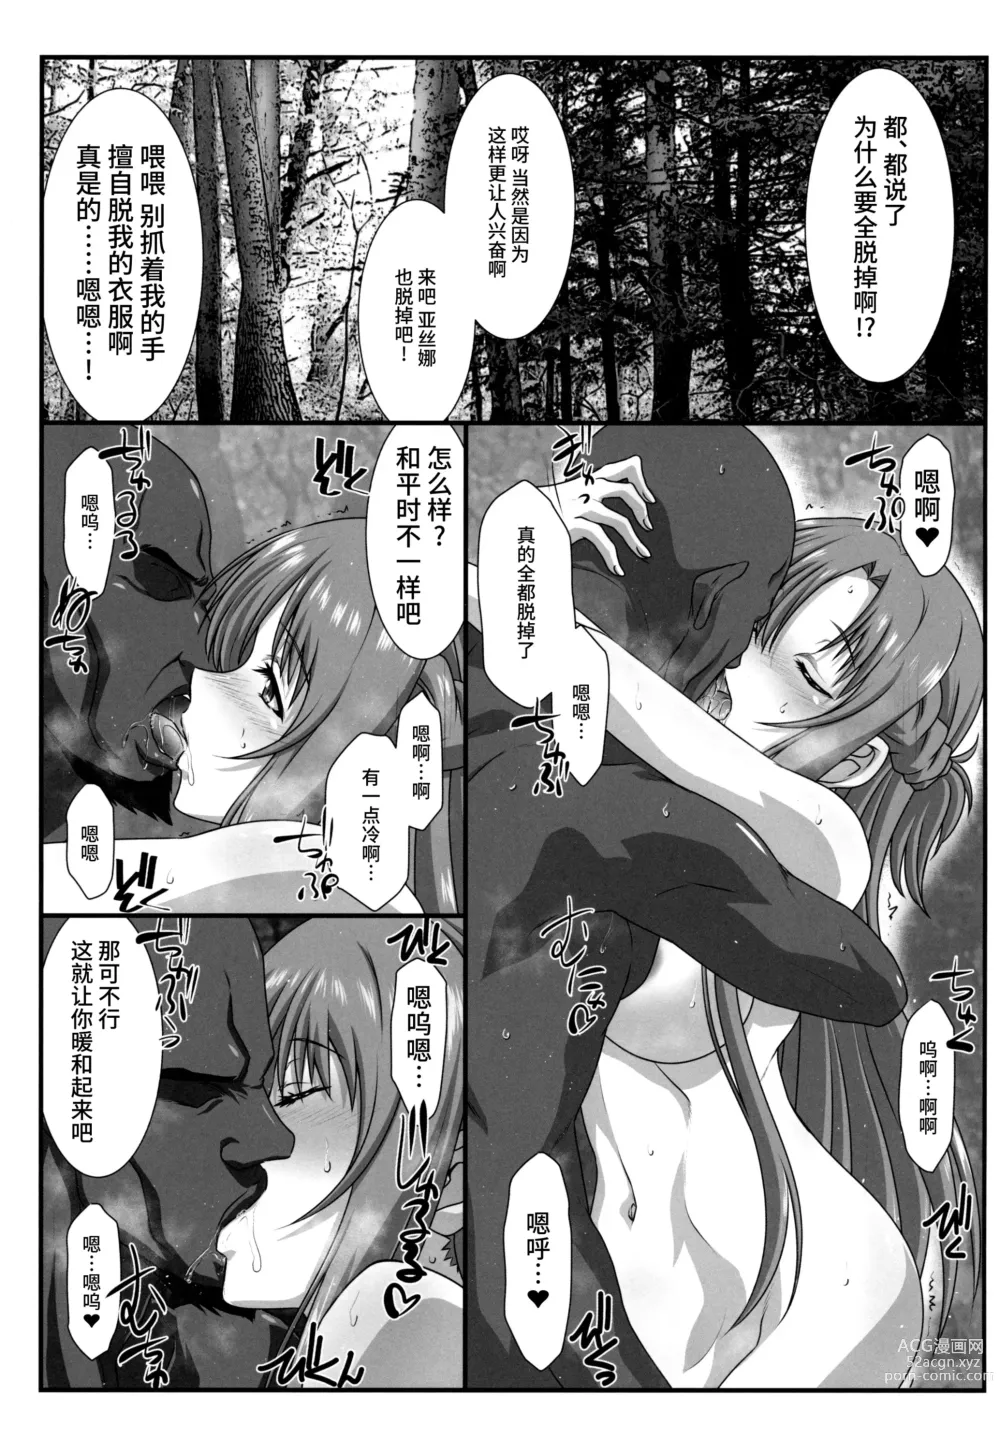 Page 4 of doujinshi Astral Bout Ver. 45